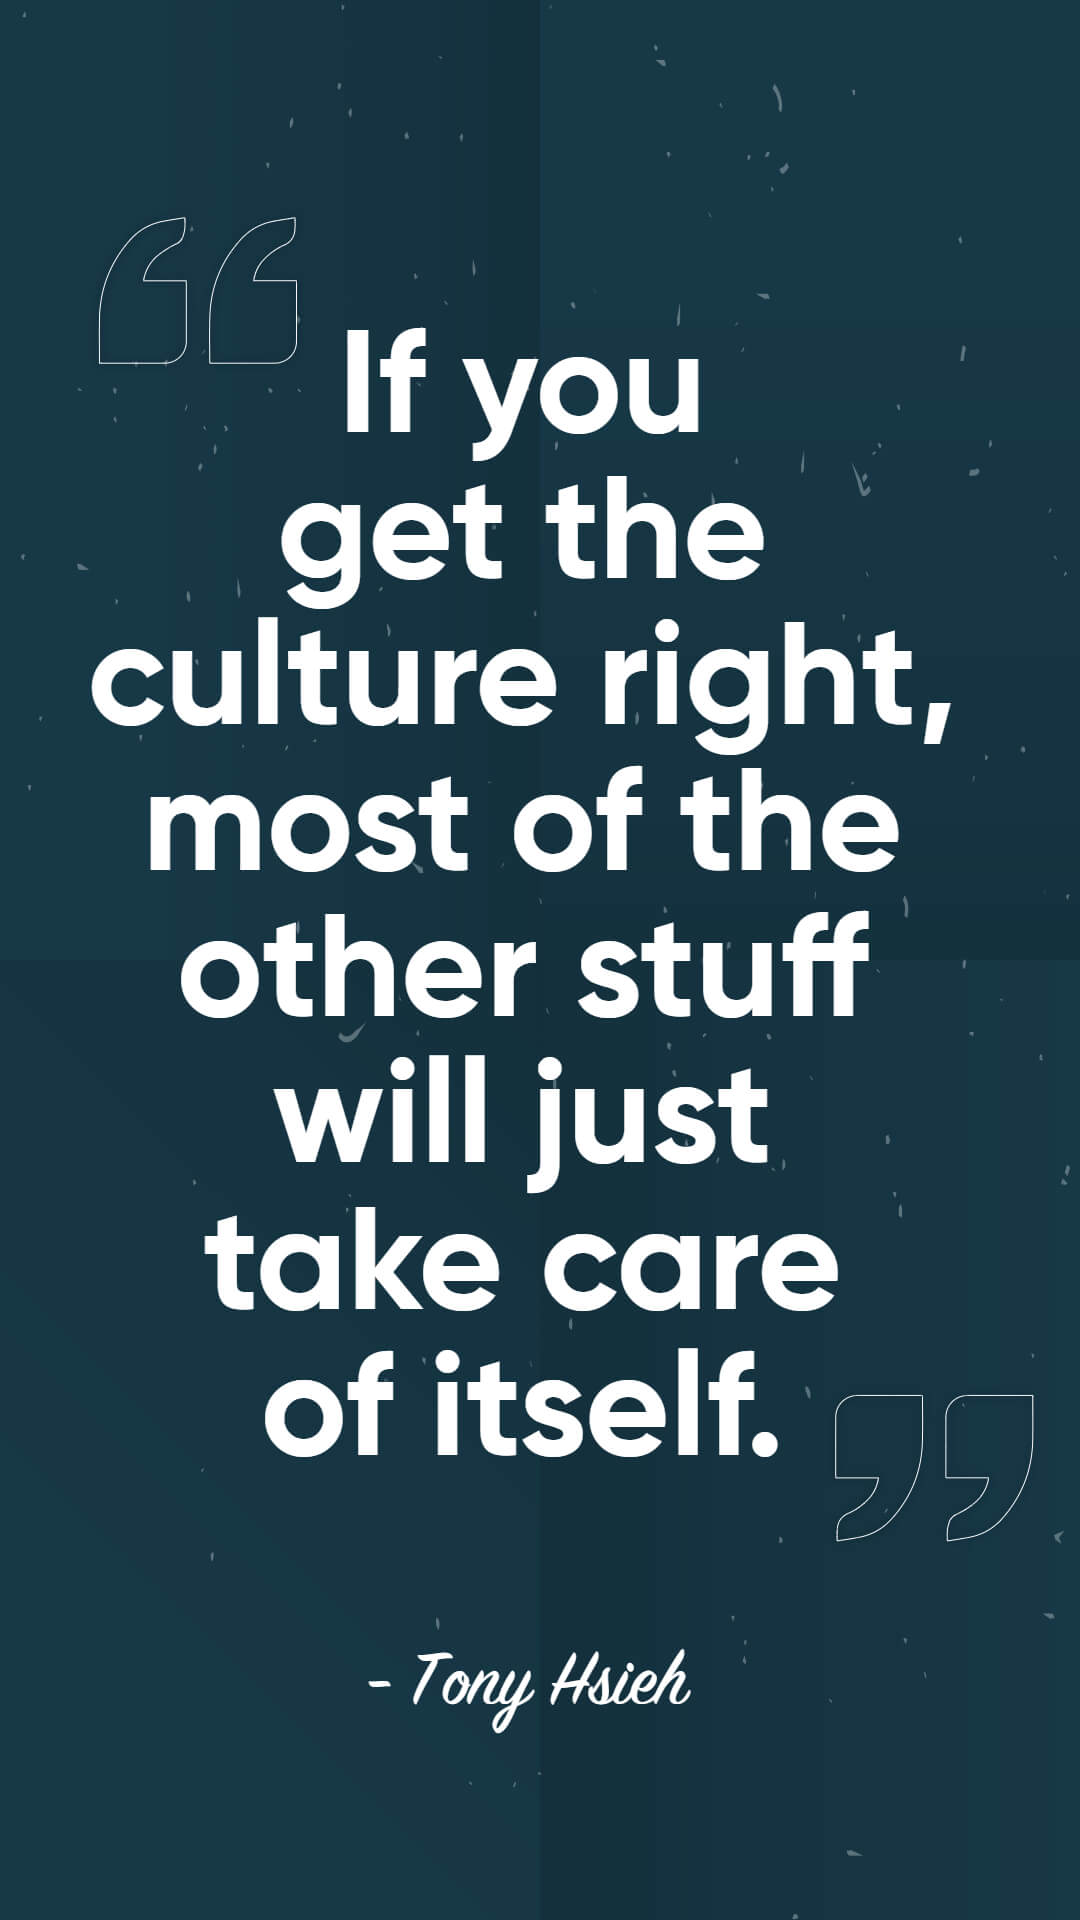 tony hsieh quote on organization culture